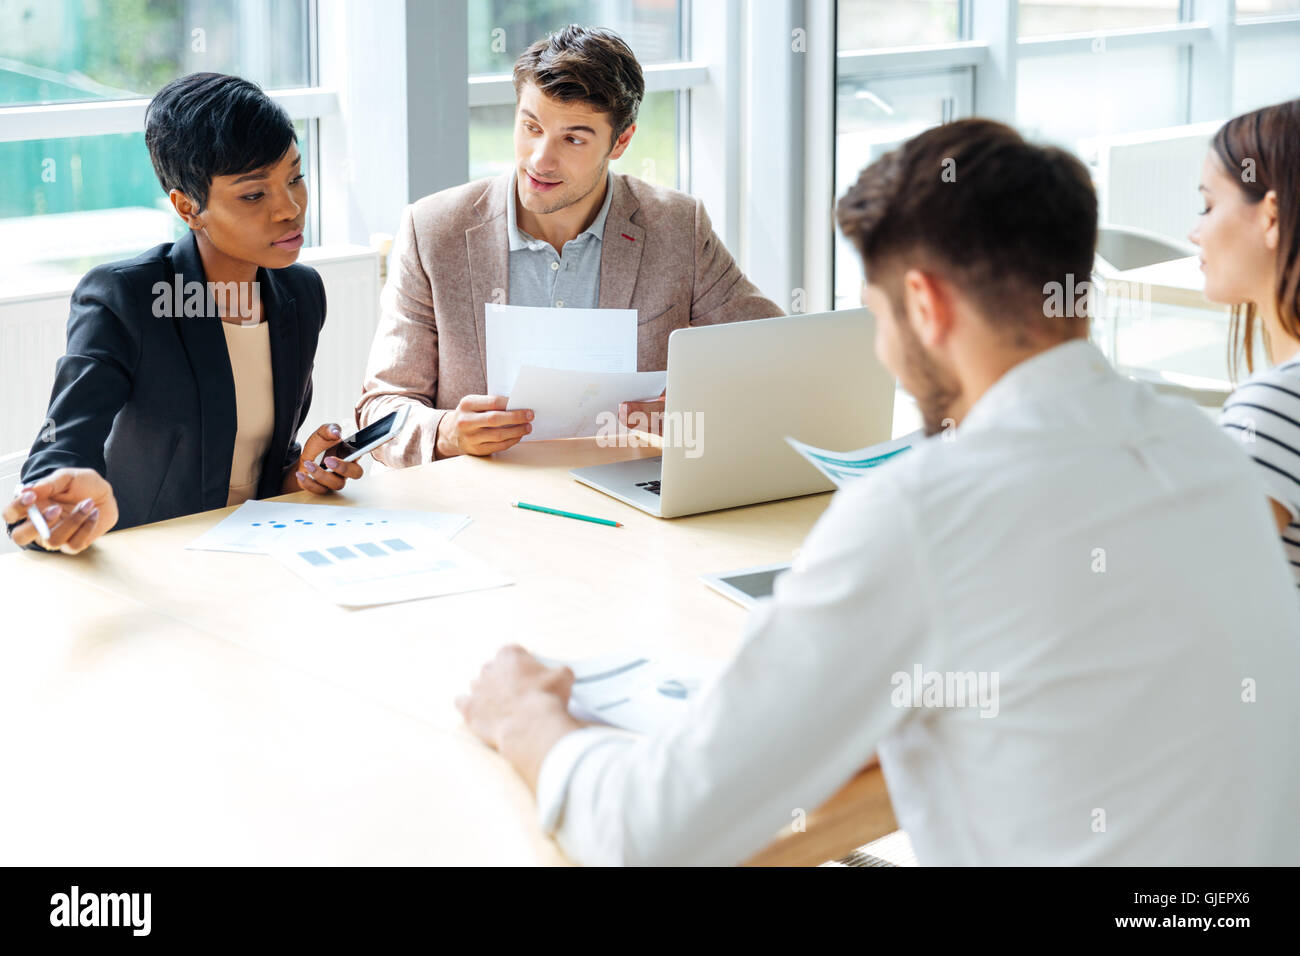 Multiethnic group of young businesspeople working together on business meeting in conference room Stock Photo